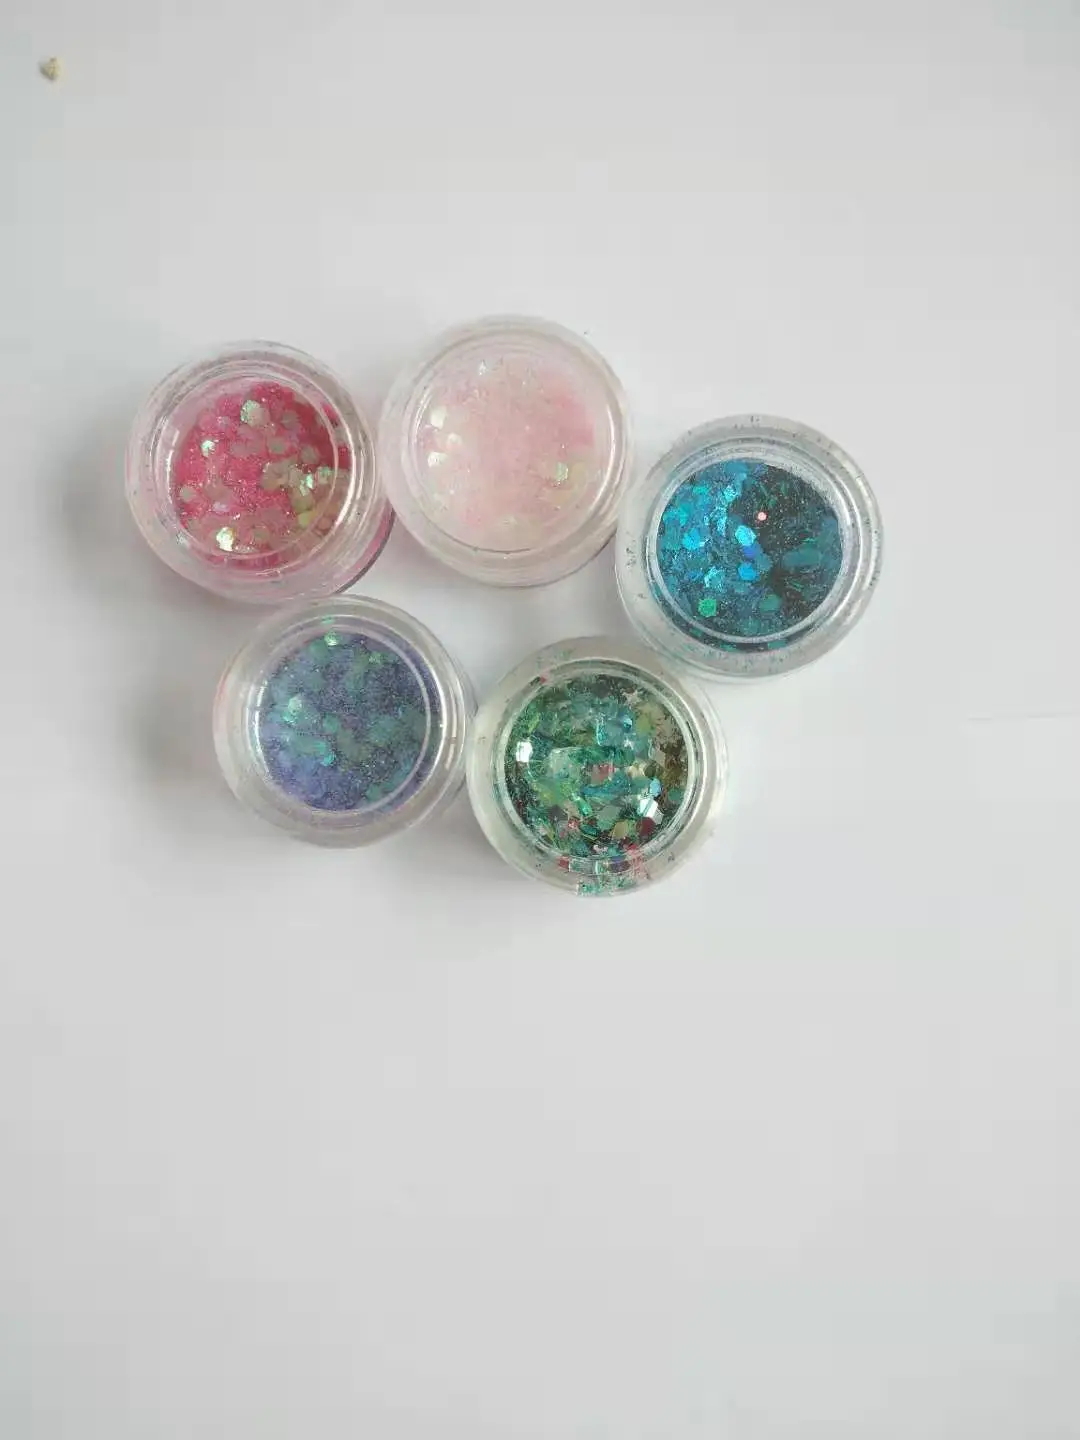 
Mixed colors Chunky Cosmetic Festival Beauty Face Body Glitter for makeup 